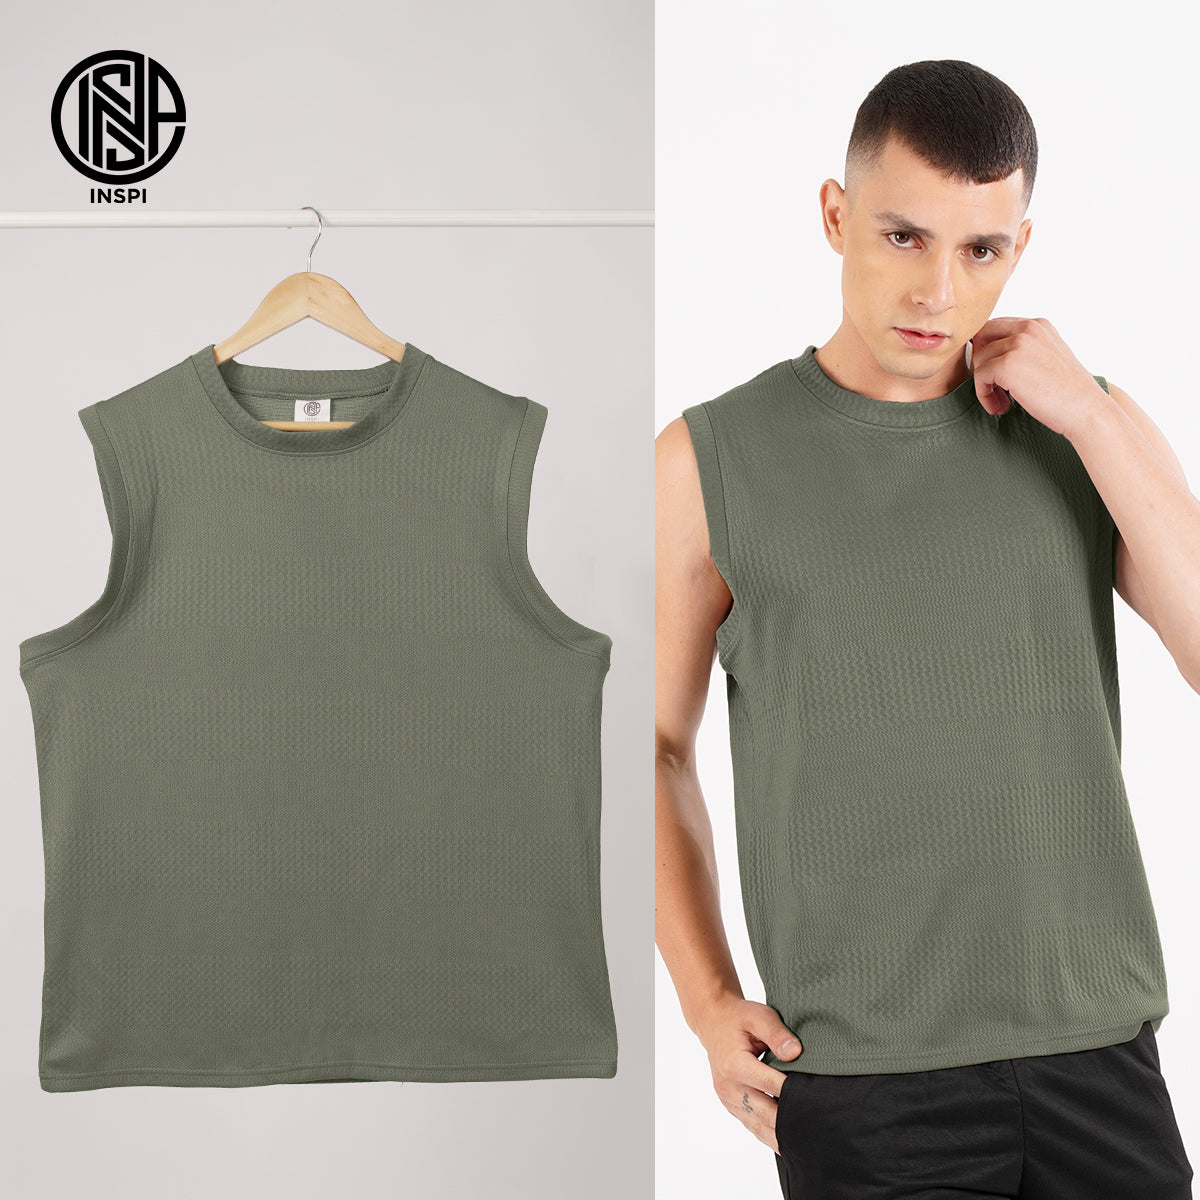 INSPI Textured Muscle Tee Collection For Men Sleeveless Striped Light Olive Tank Top Sando For Women Gym Workout Clothes Exercise Outfit